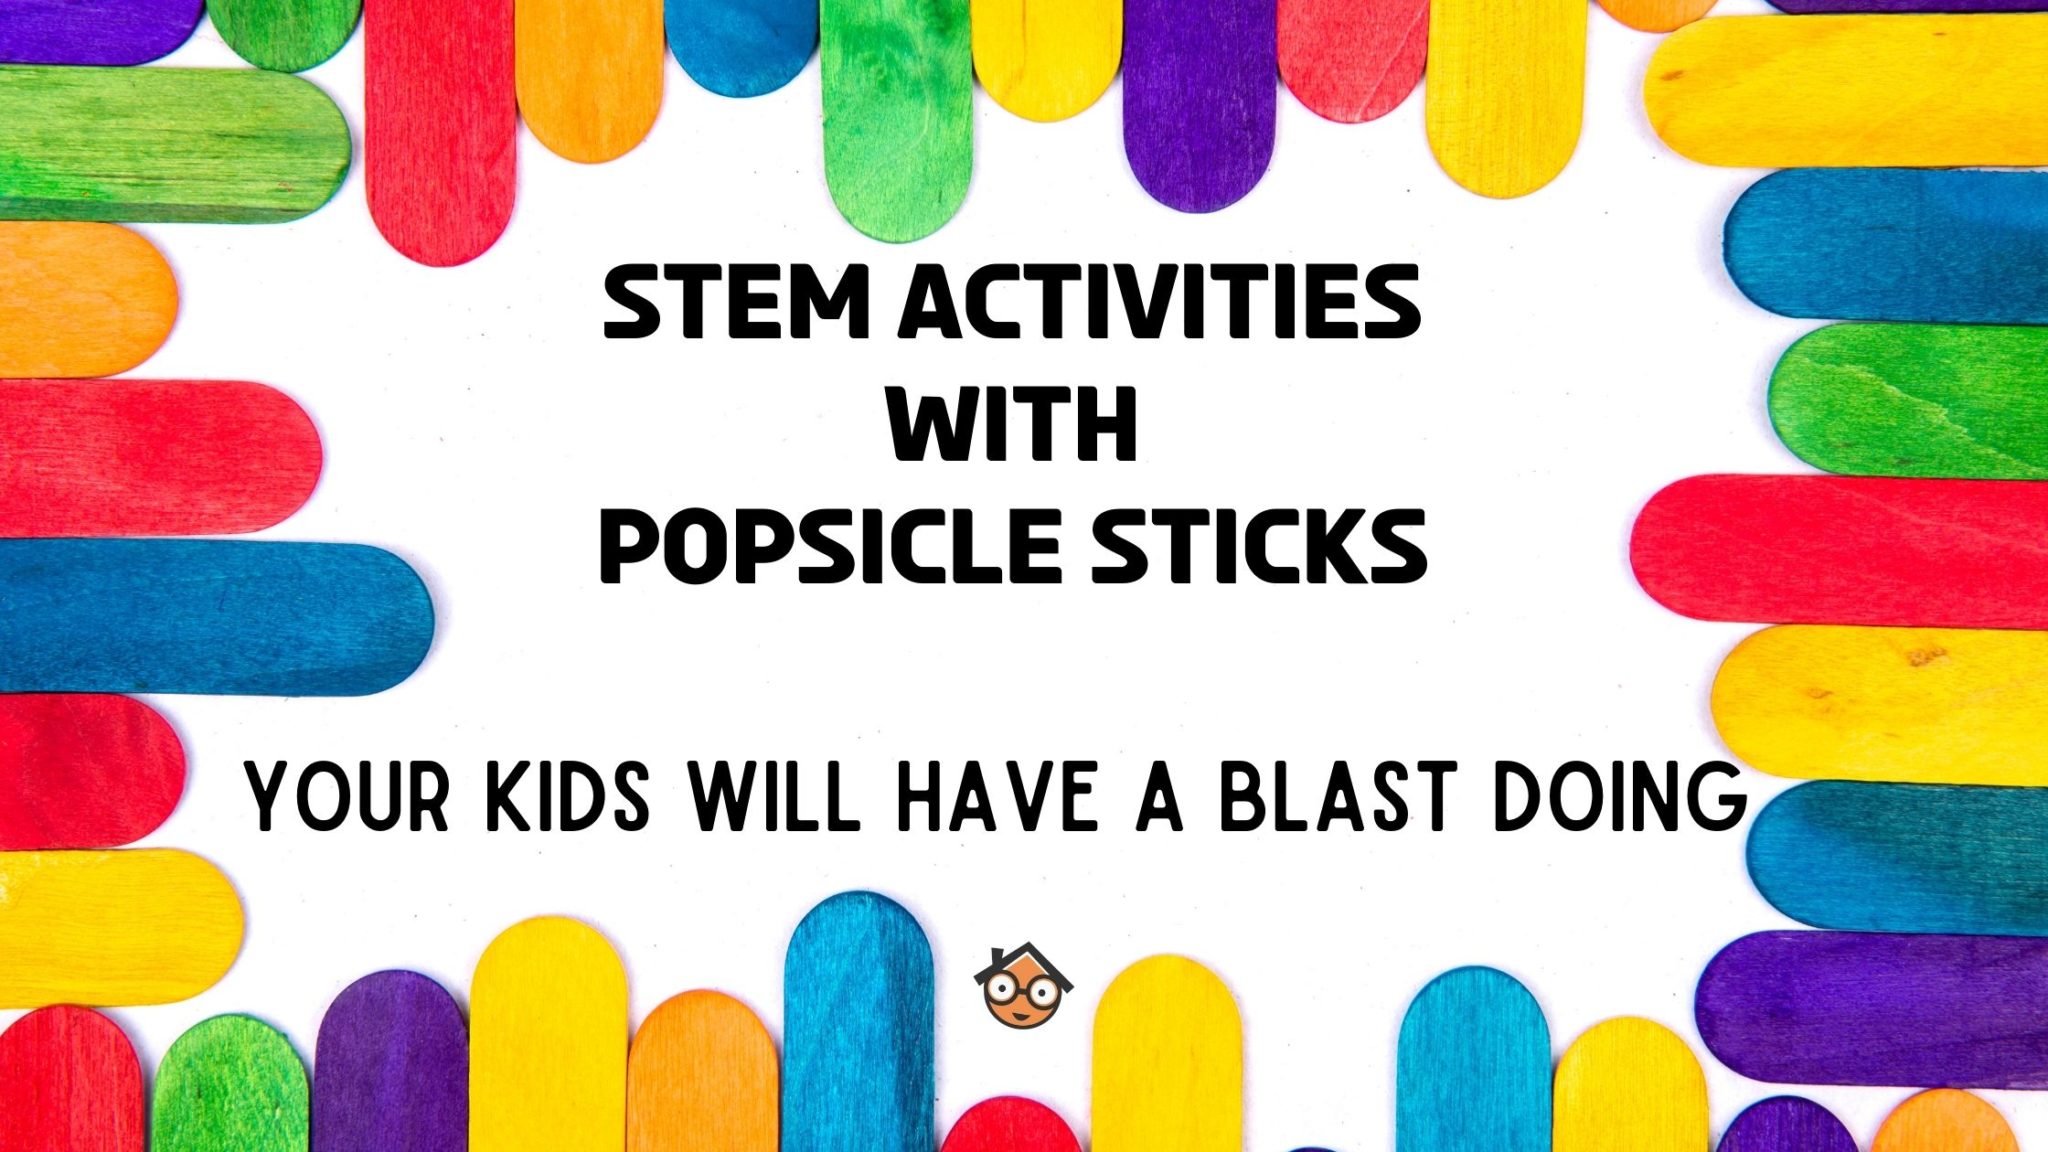 https://thesecretlifeofhomeschoolers.com/wp-content/uploads/2022/01/STEM-Activities-with-popsicle-sticks-Your-Kids-will-have-a-blast-with-scaled.jpg